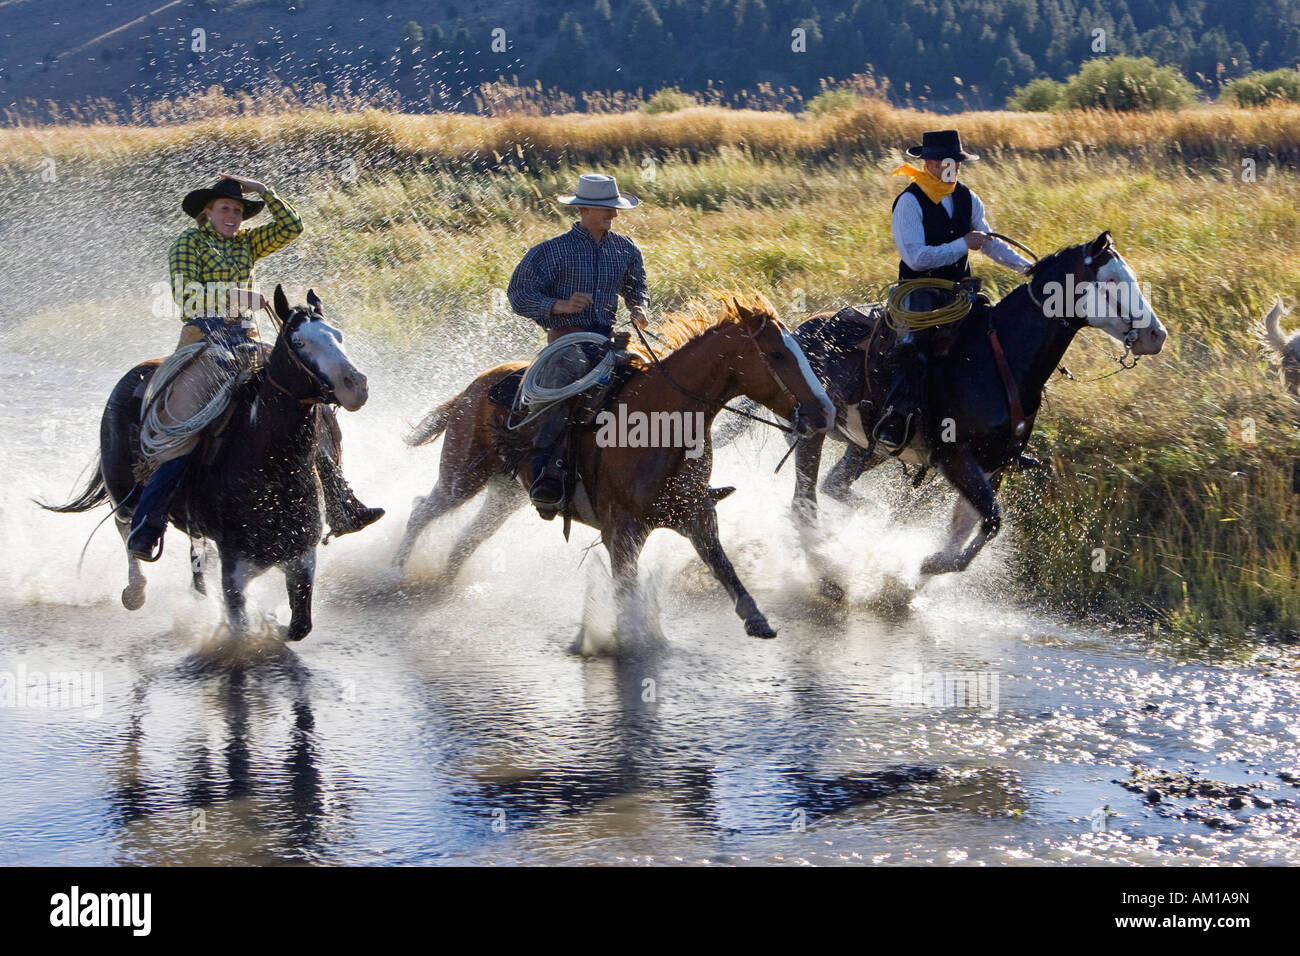 Cowboys riding in water, wildwest, Oregon, USA Stock Photo